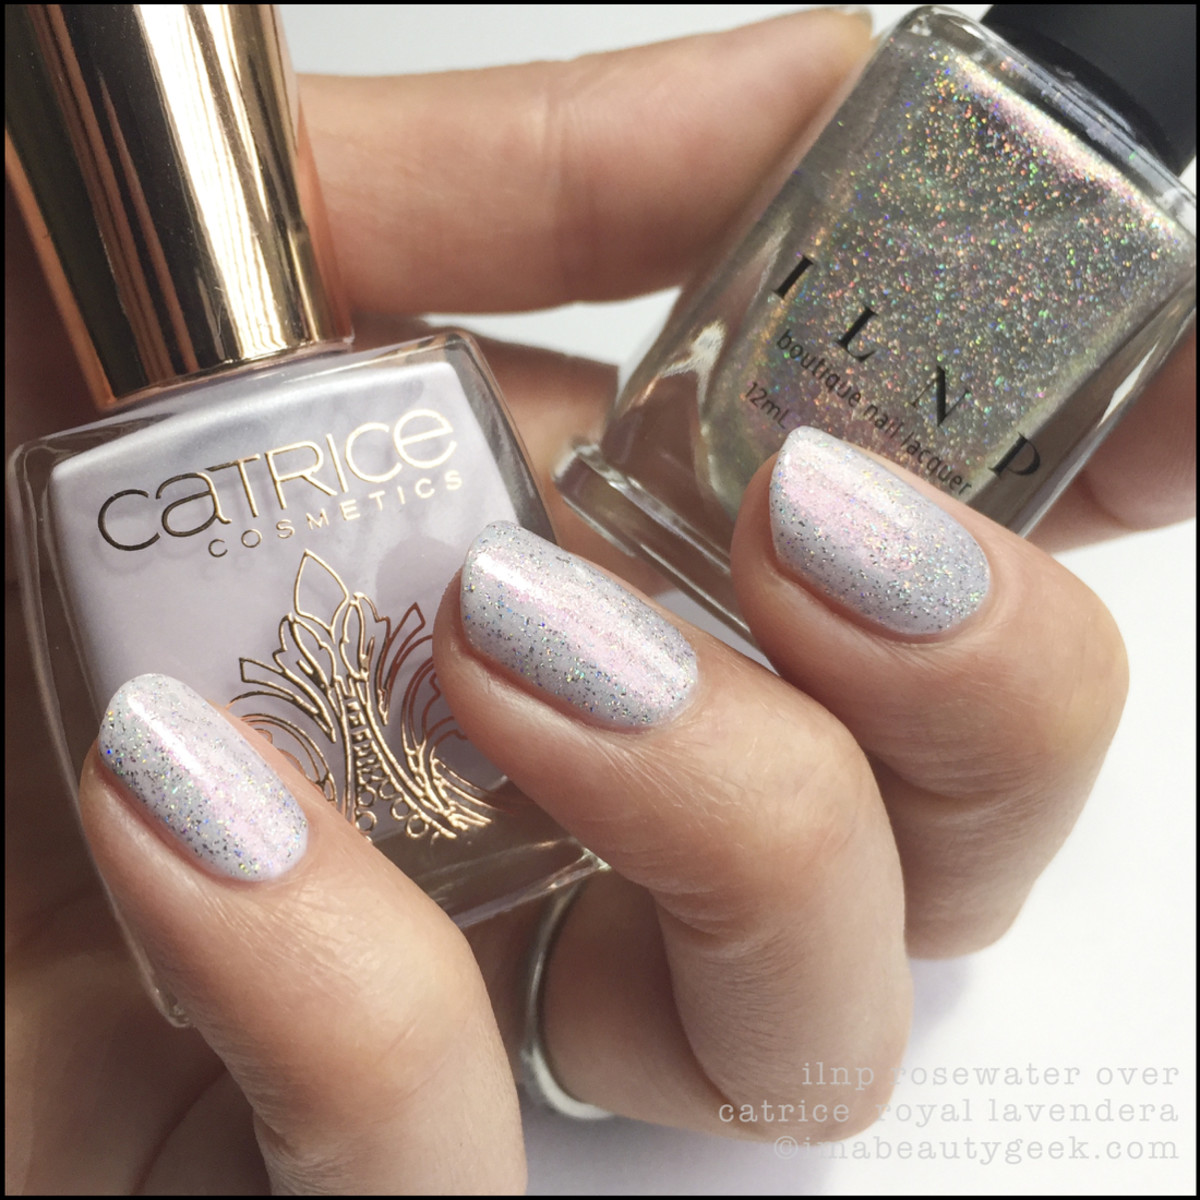 ILNP Rosewater over Catrice Royal Lavendera NOTD